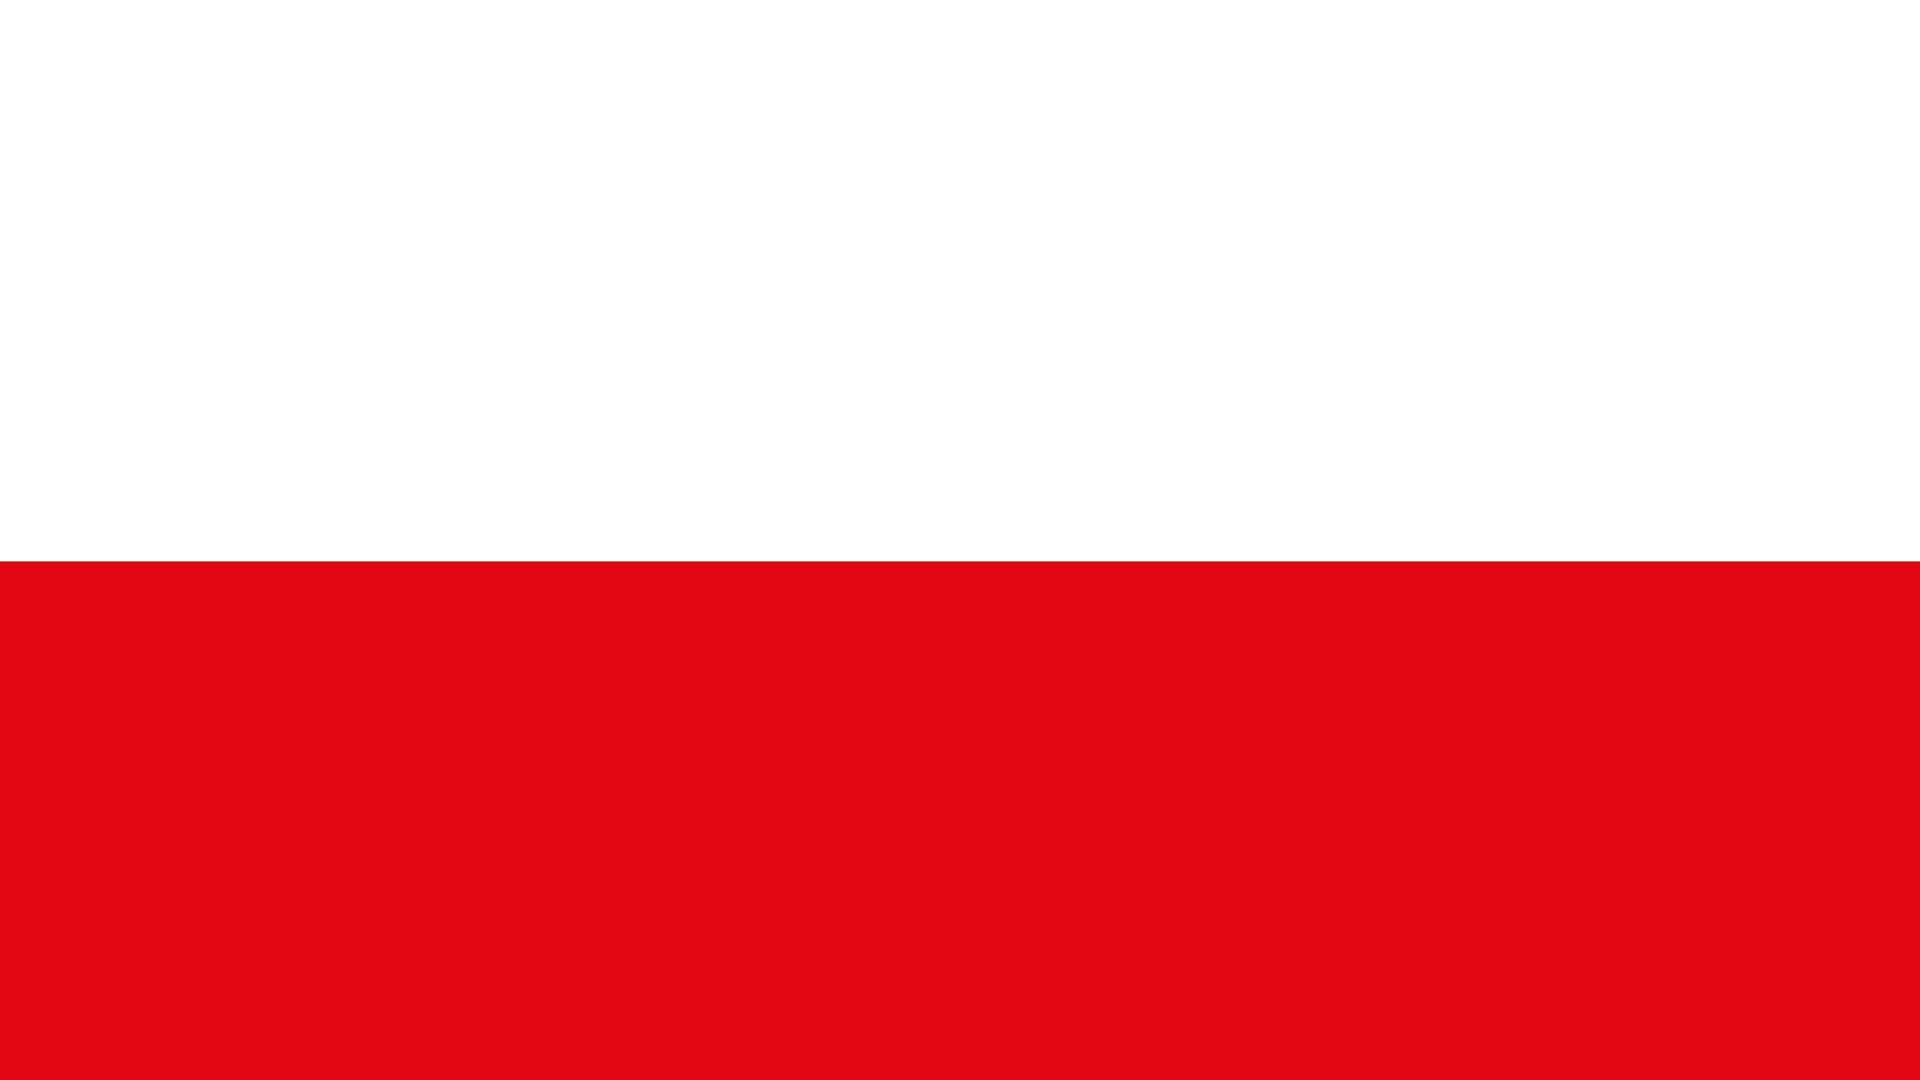 Report on the Polish power system 2018